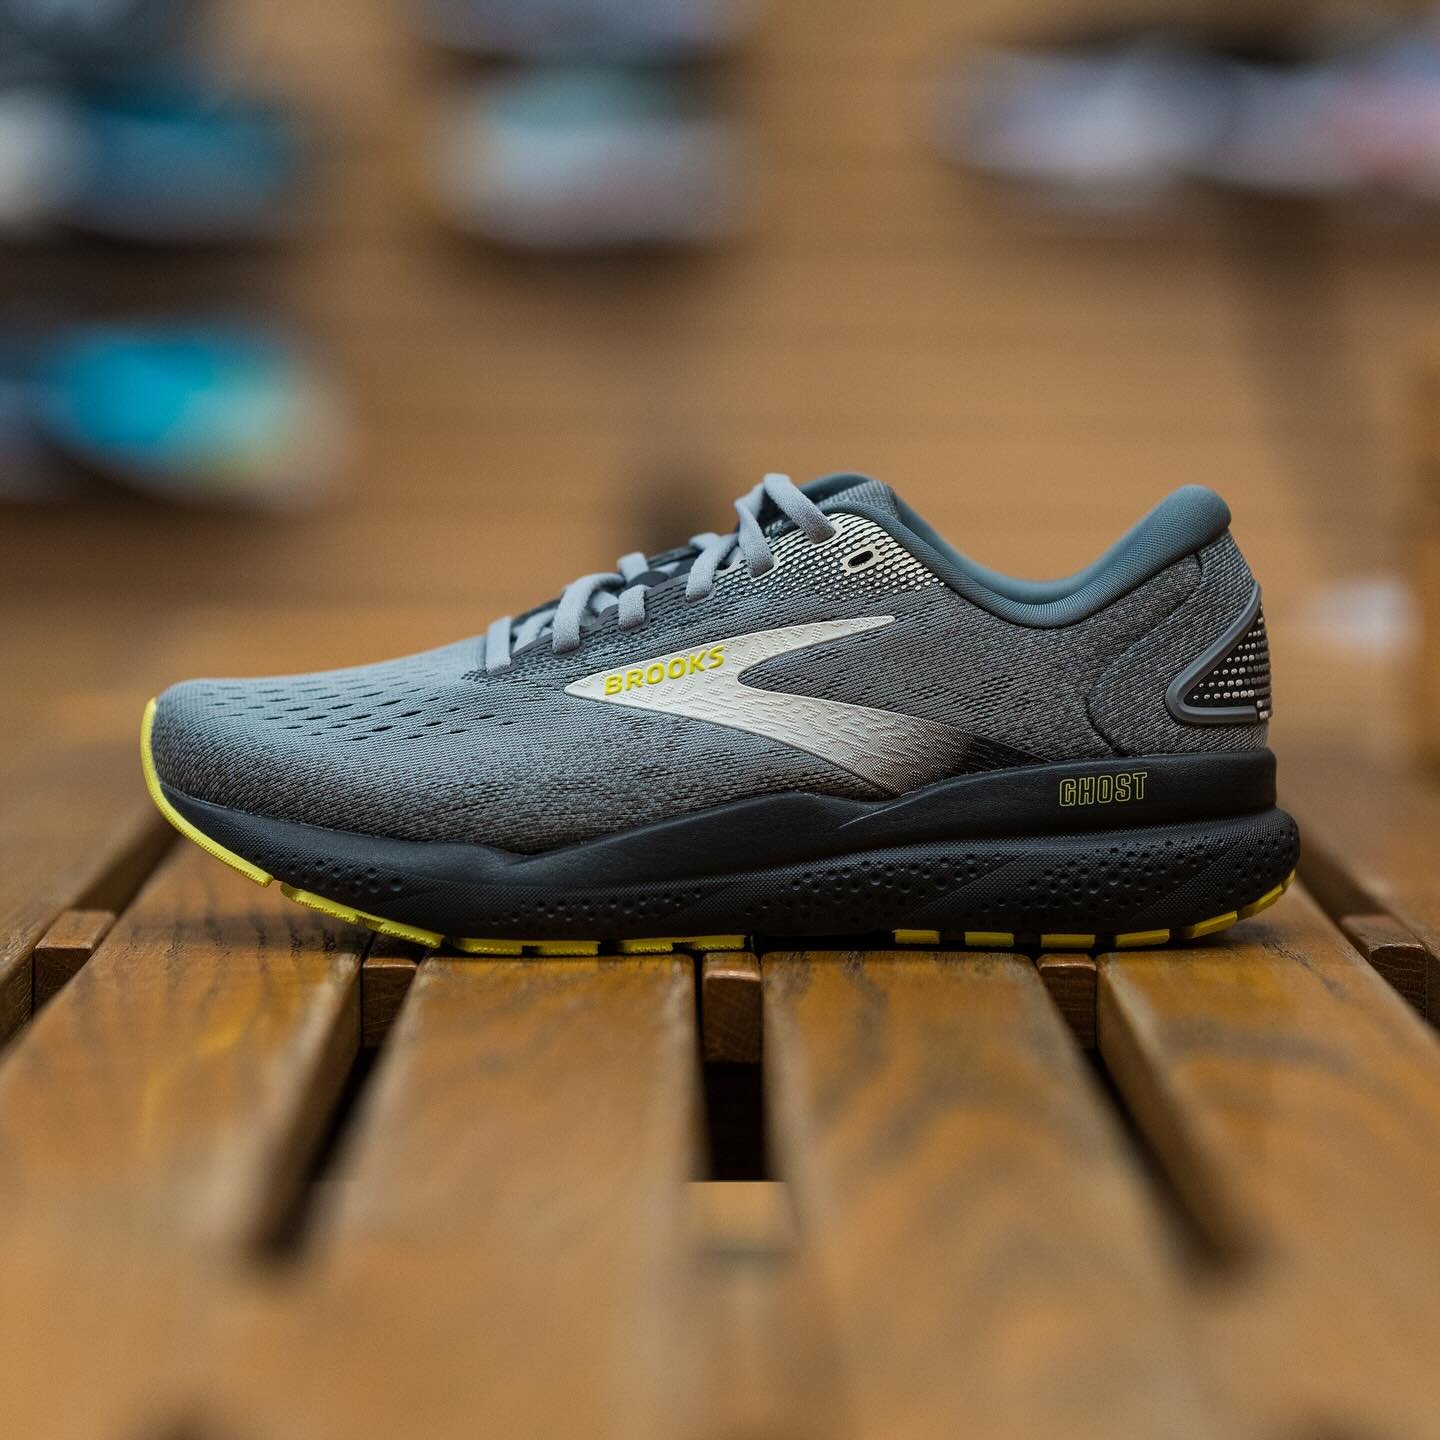 Brooks Ghost 16 | A long time staple is back with a brand new update! 

The Brooks Ghost 16 is an every day trainer aimed to offer smooth cushioning day after day. The midsole features a redesigned DNA LOFT v3 cushioning for a soft and responsive rid